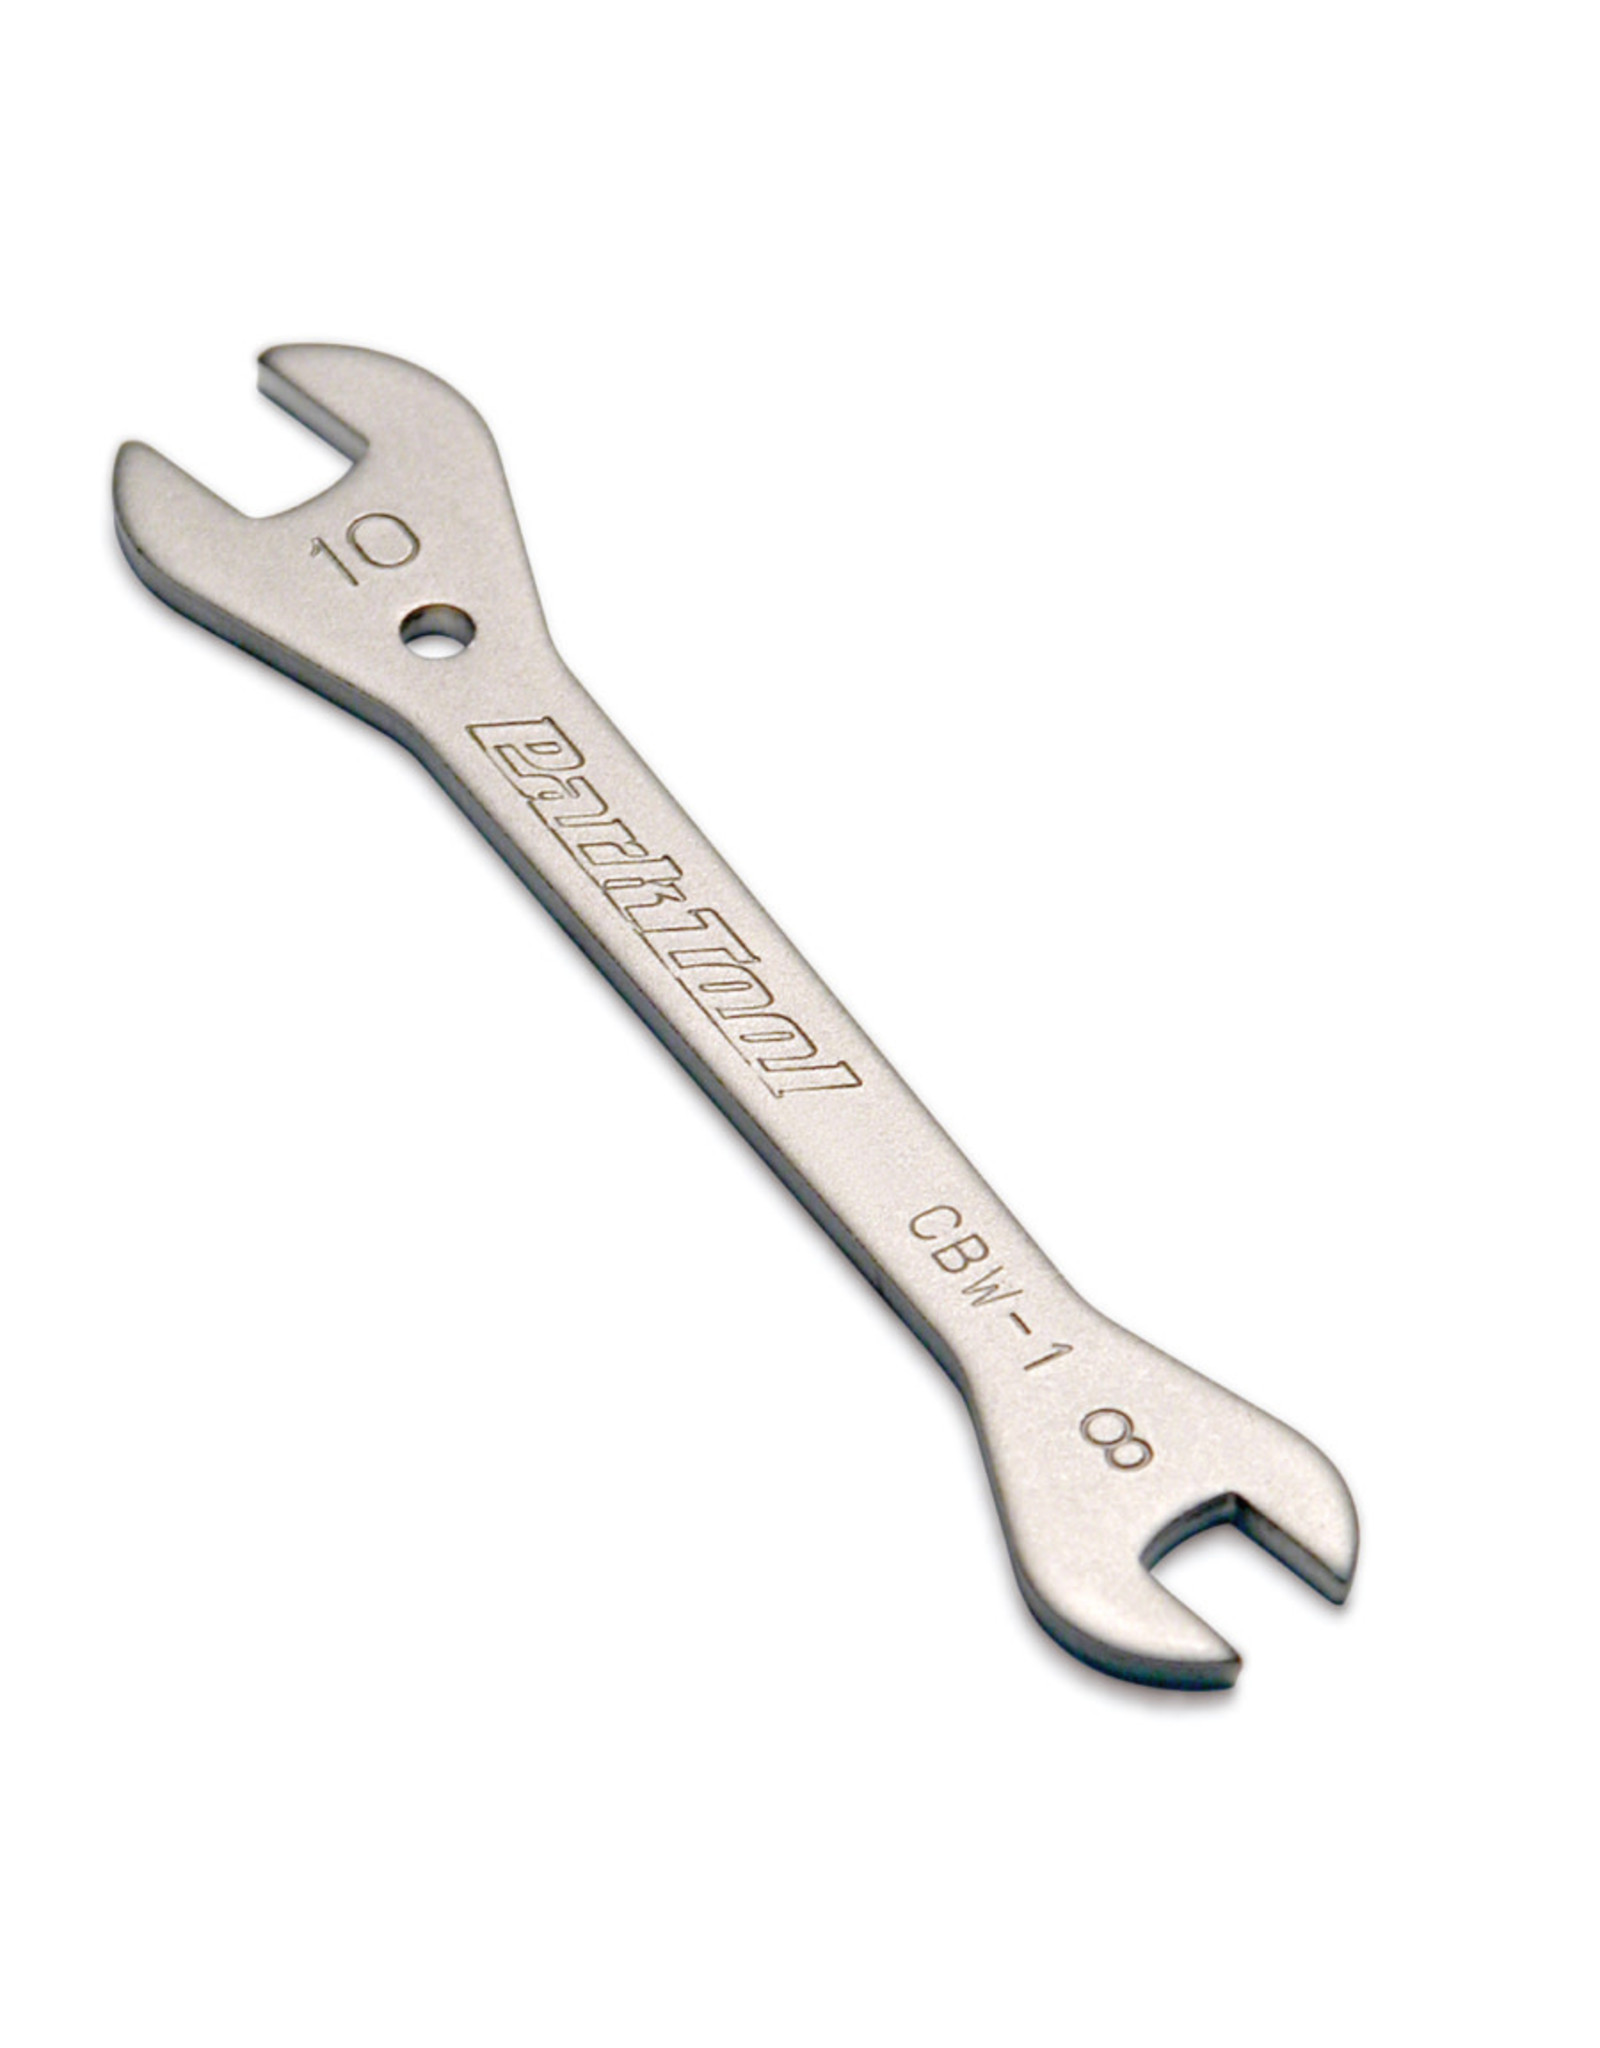 Park Tool Park Tool CBW-1 Open End Brake Wrench: 8.0 - 10.0mm